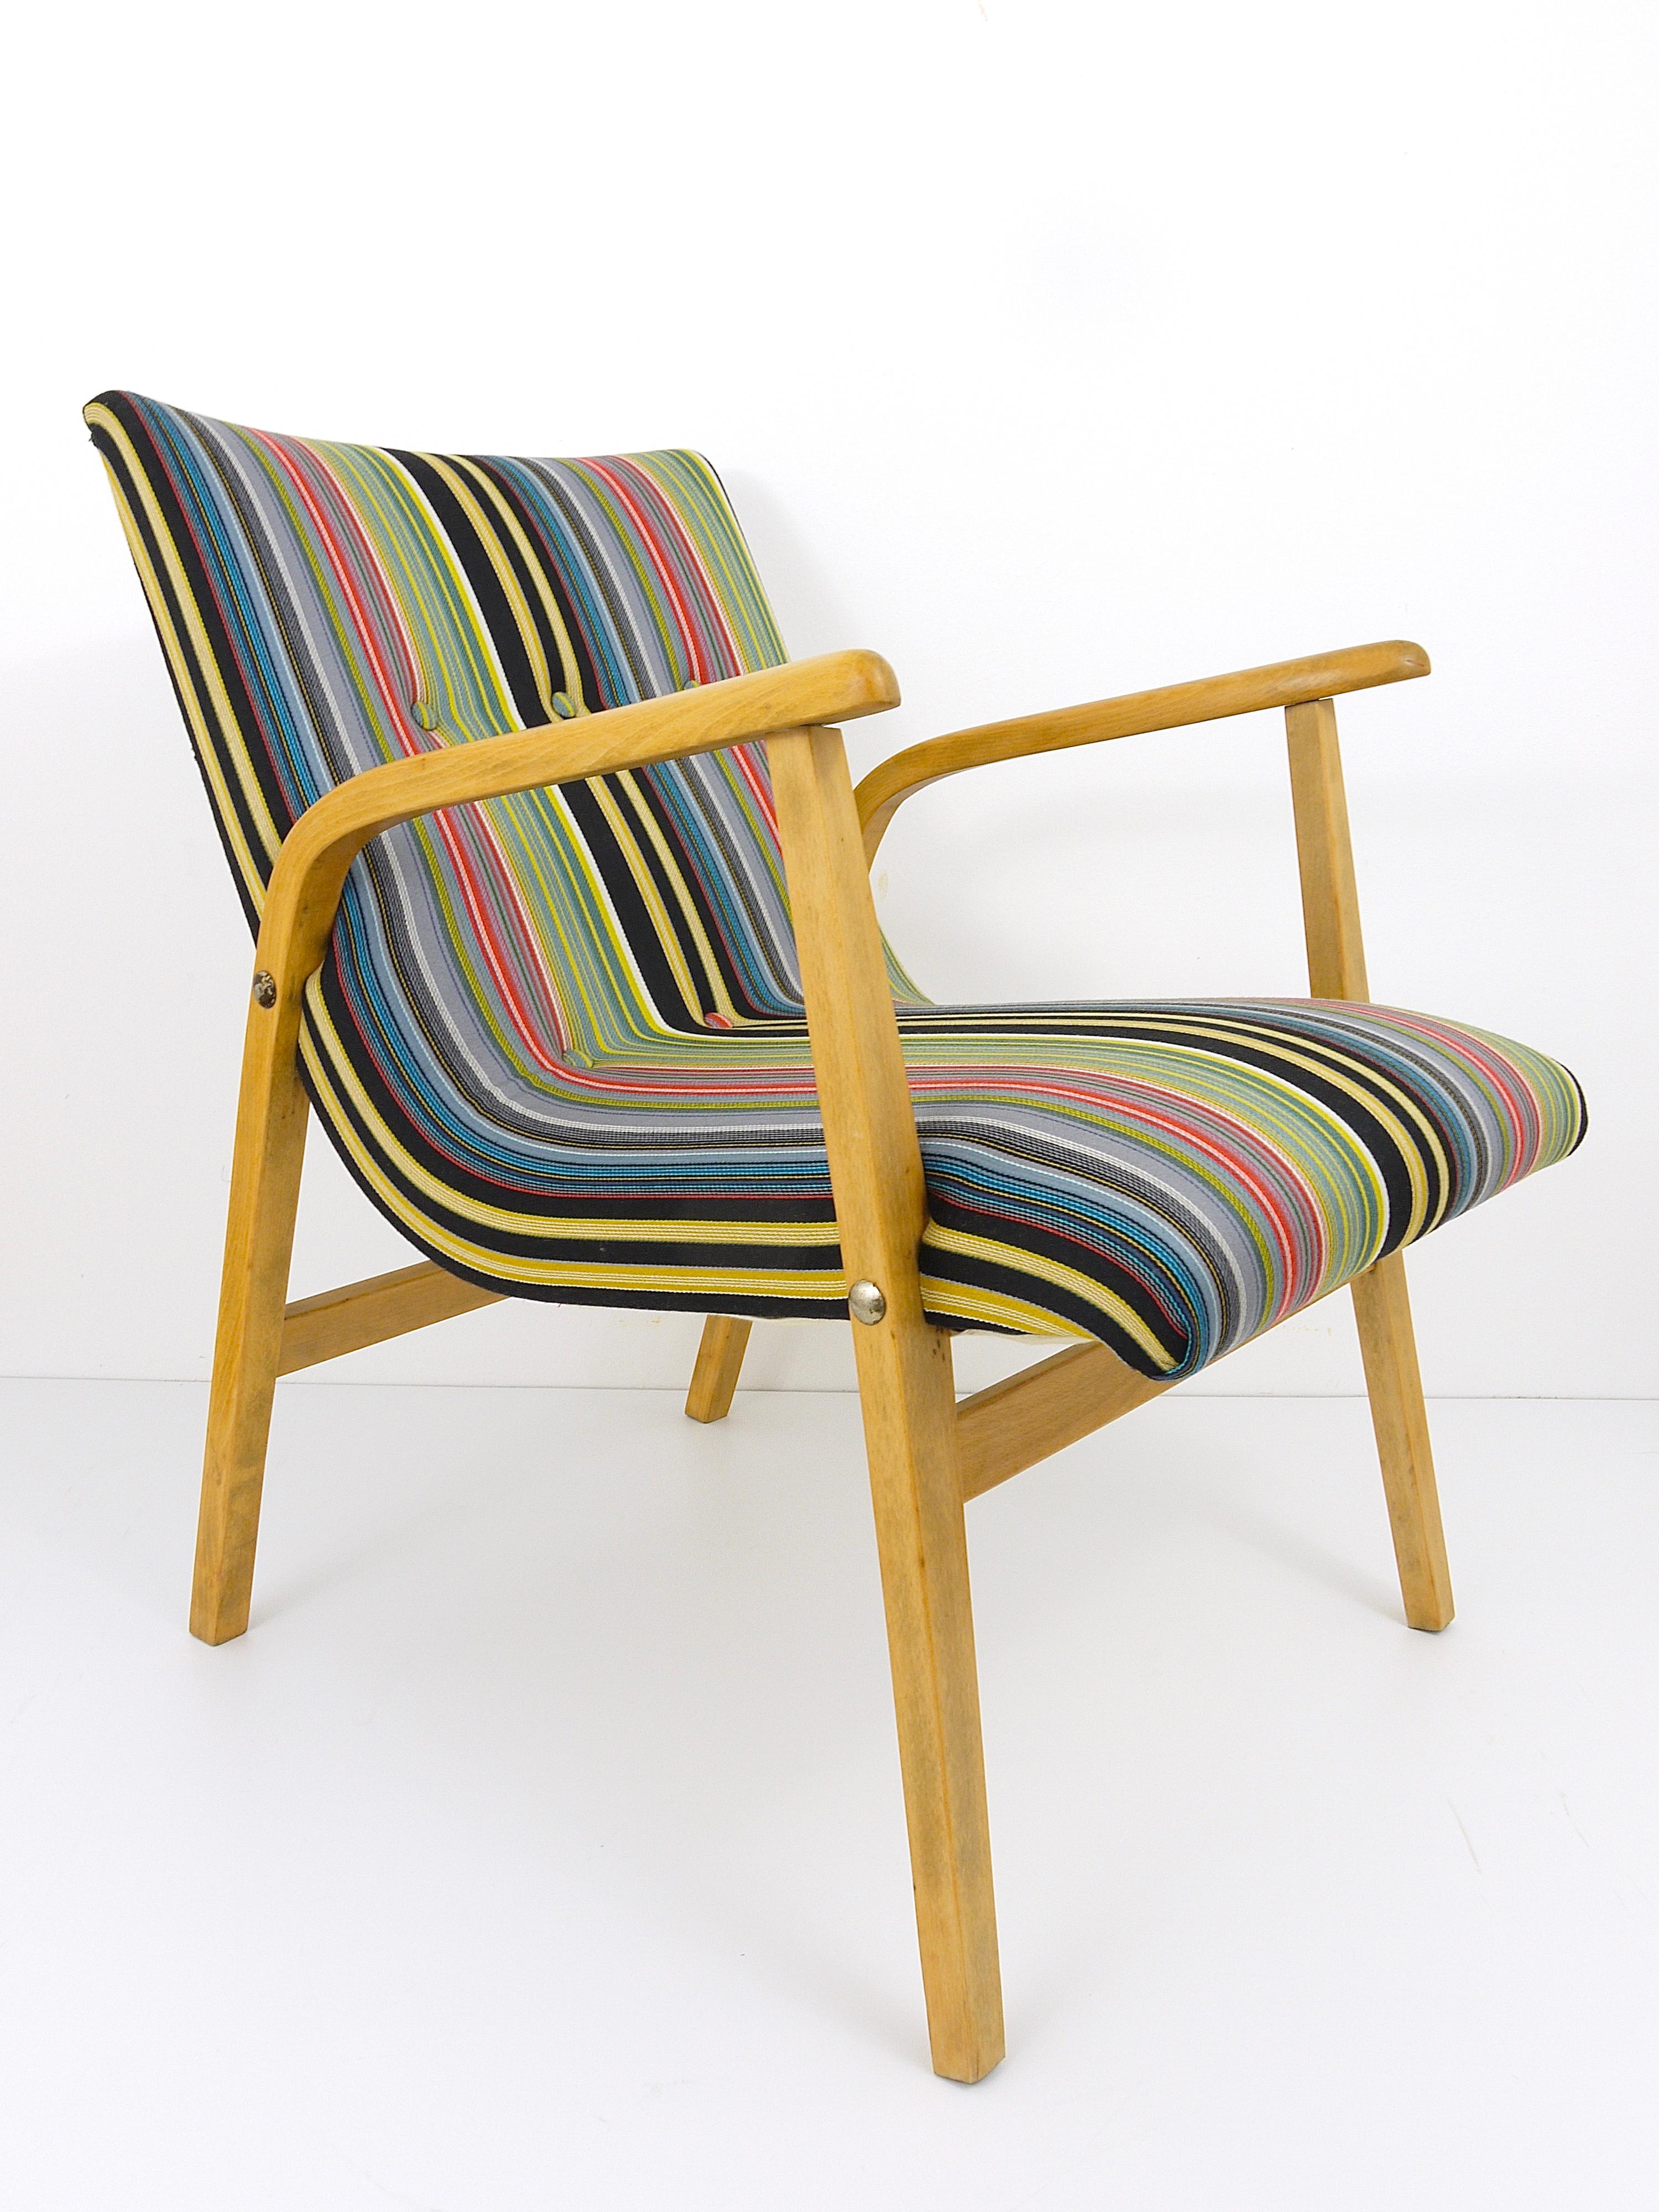 1950s Roland Rainer Cafe Ritter Chair with Paul Smith Maharam Upholstery 2